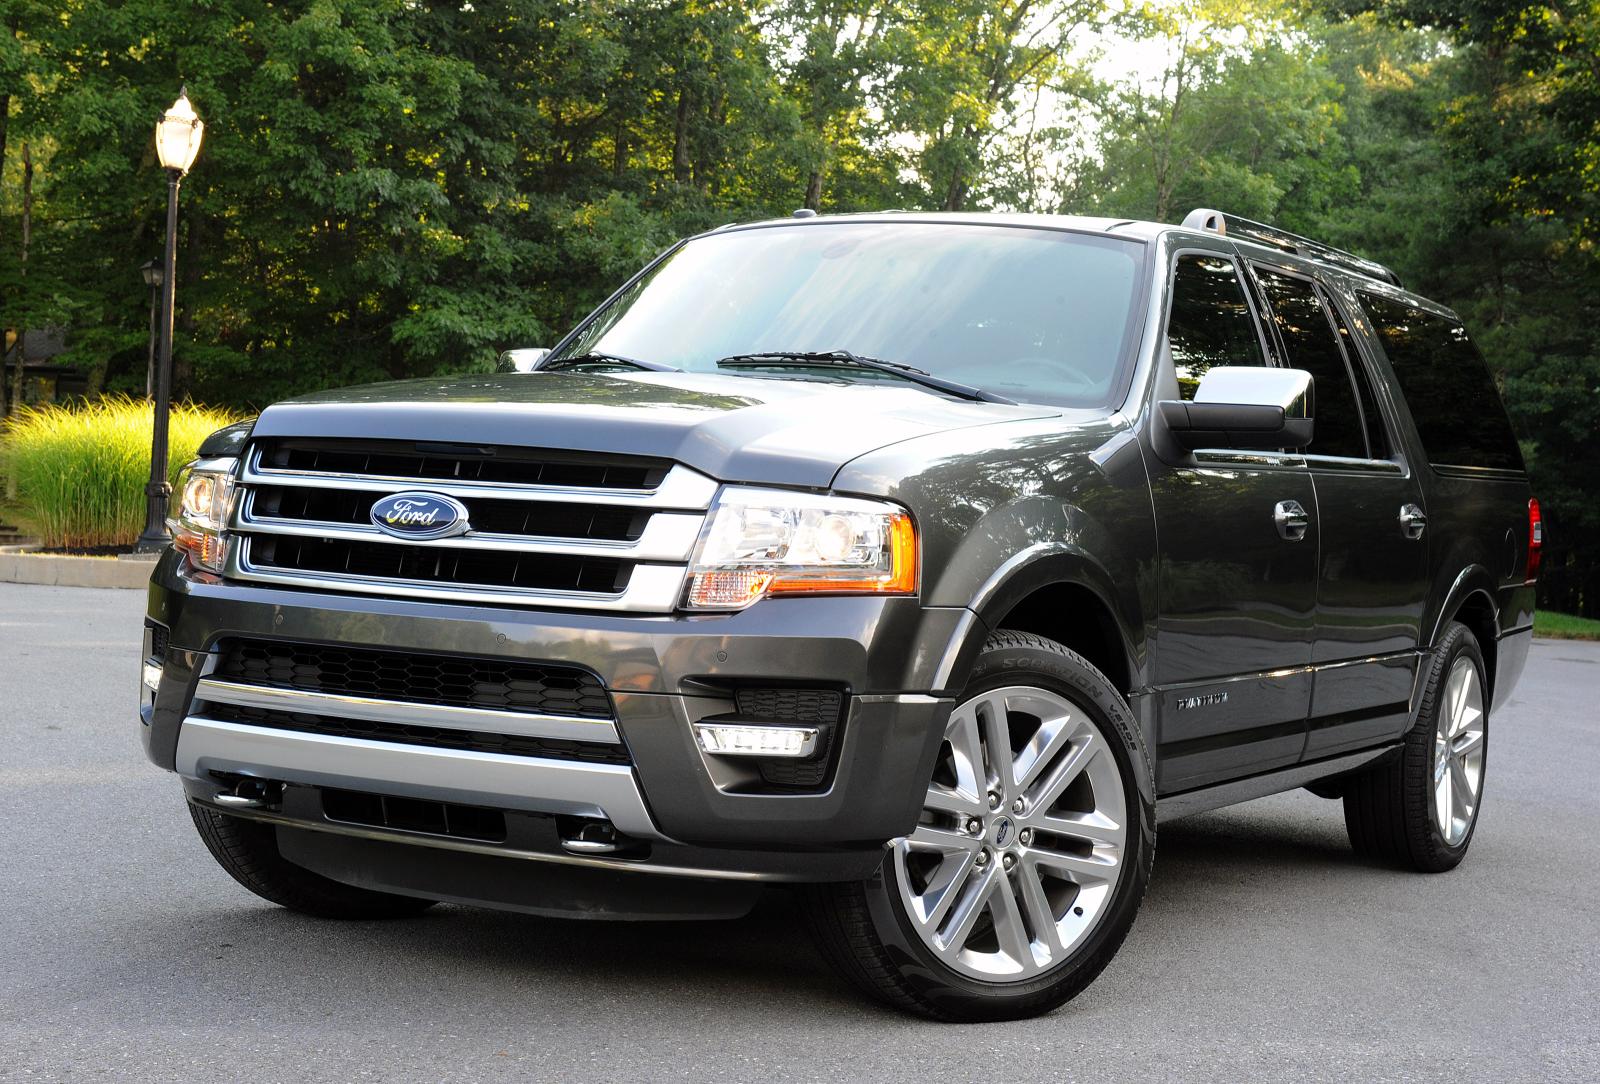 2015-FORD-EXPEDITION_SV3_7441